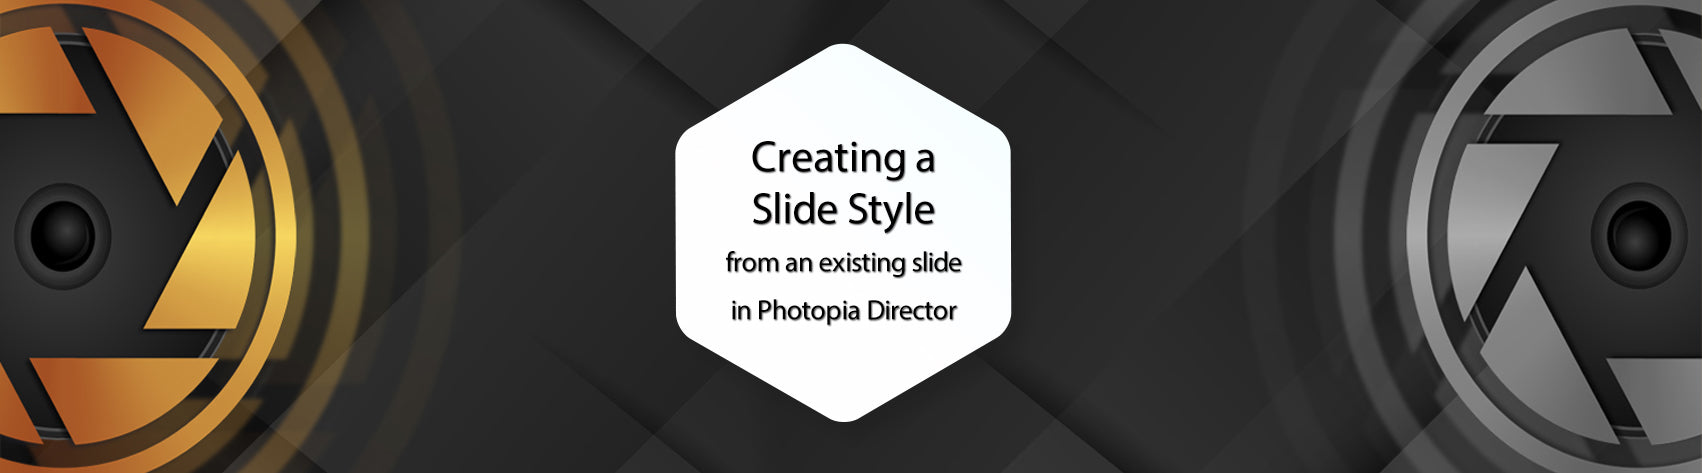 Creating a Slide Style from an existing slide